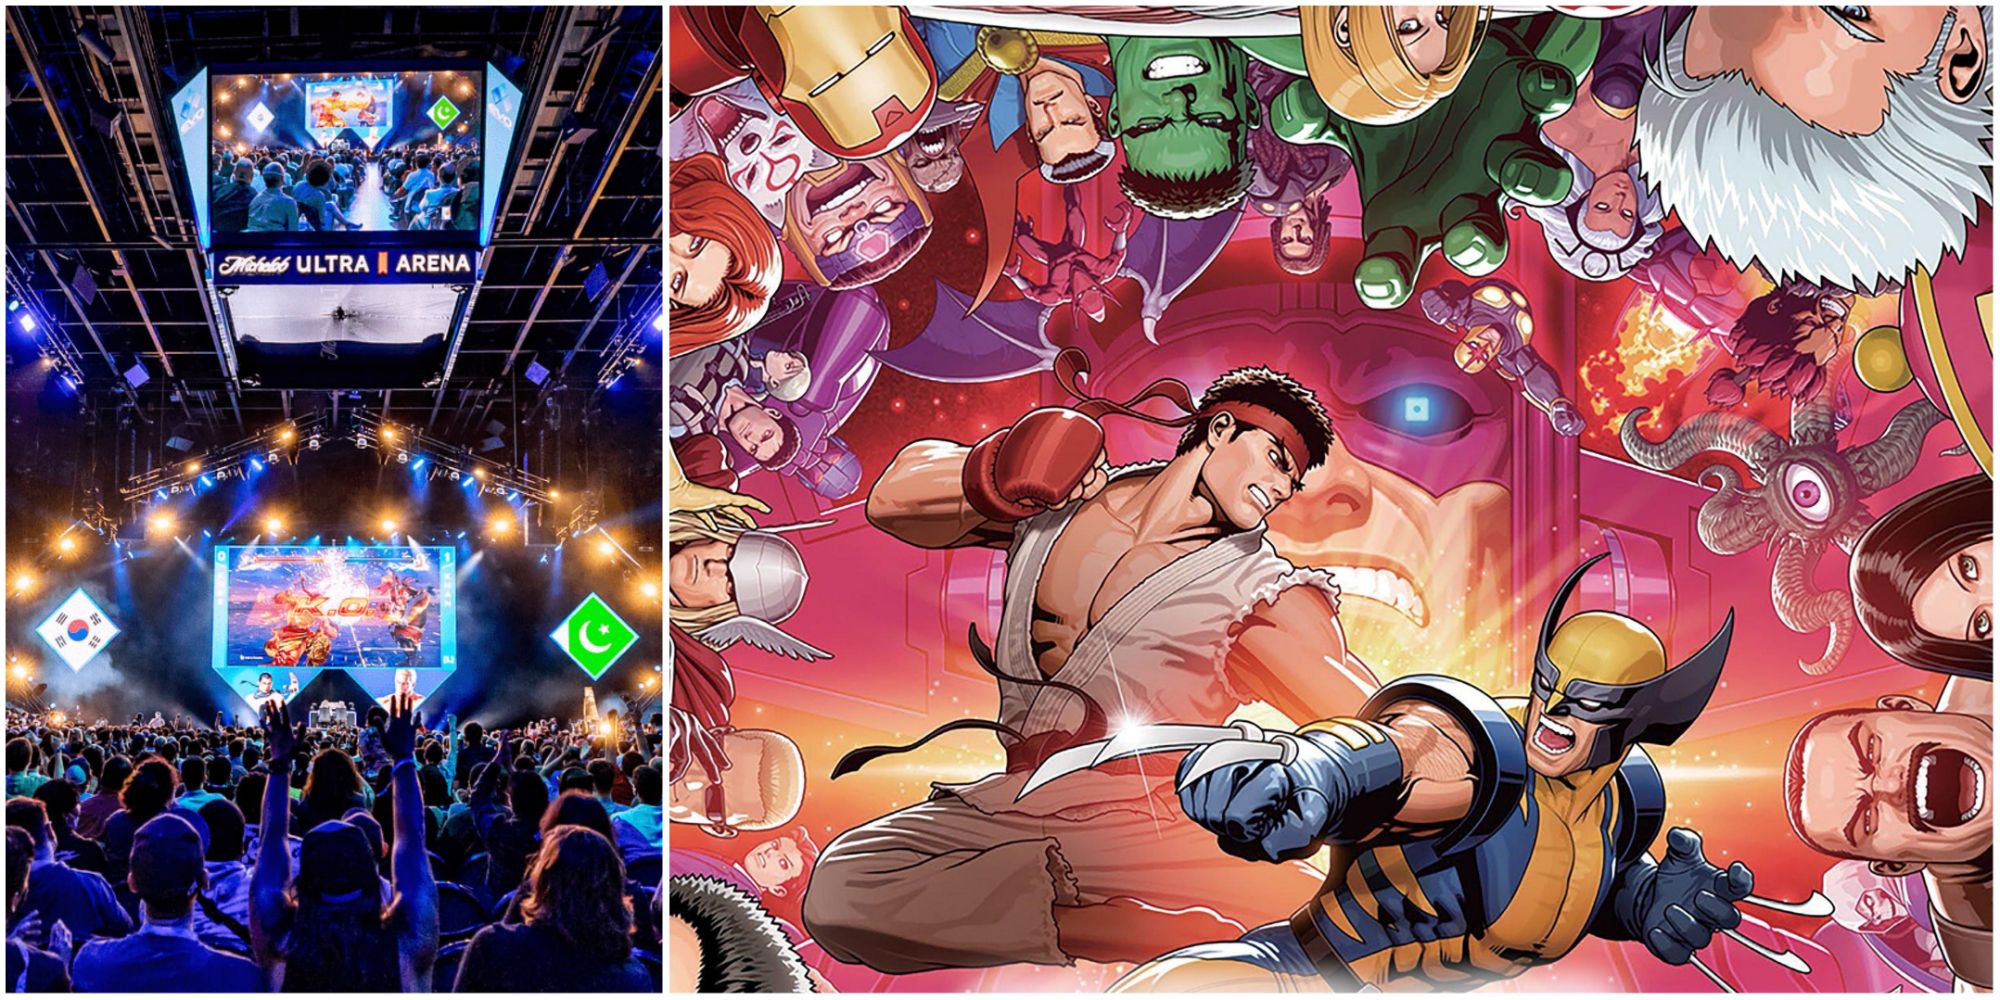 Banner image for Evo 2023 featuring Ultimate Marvel vs Capcom 3